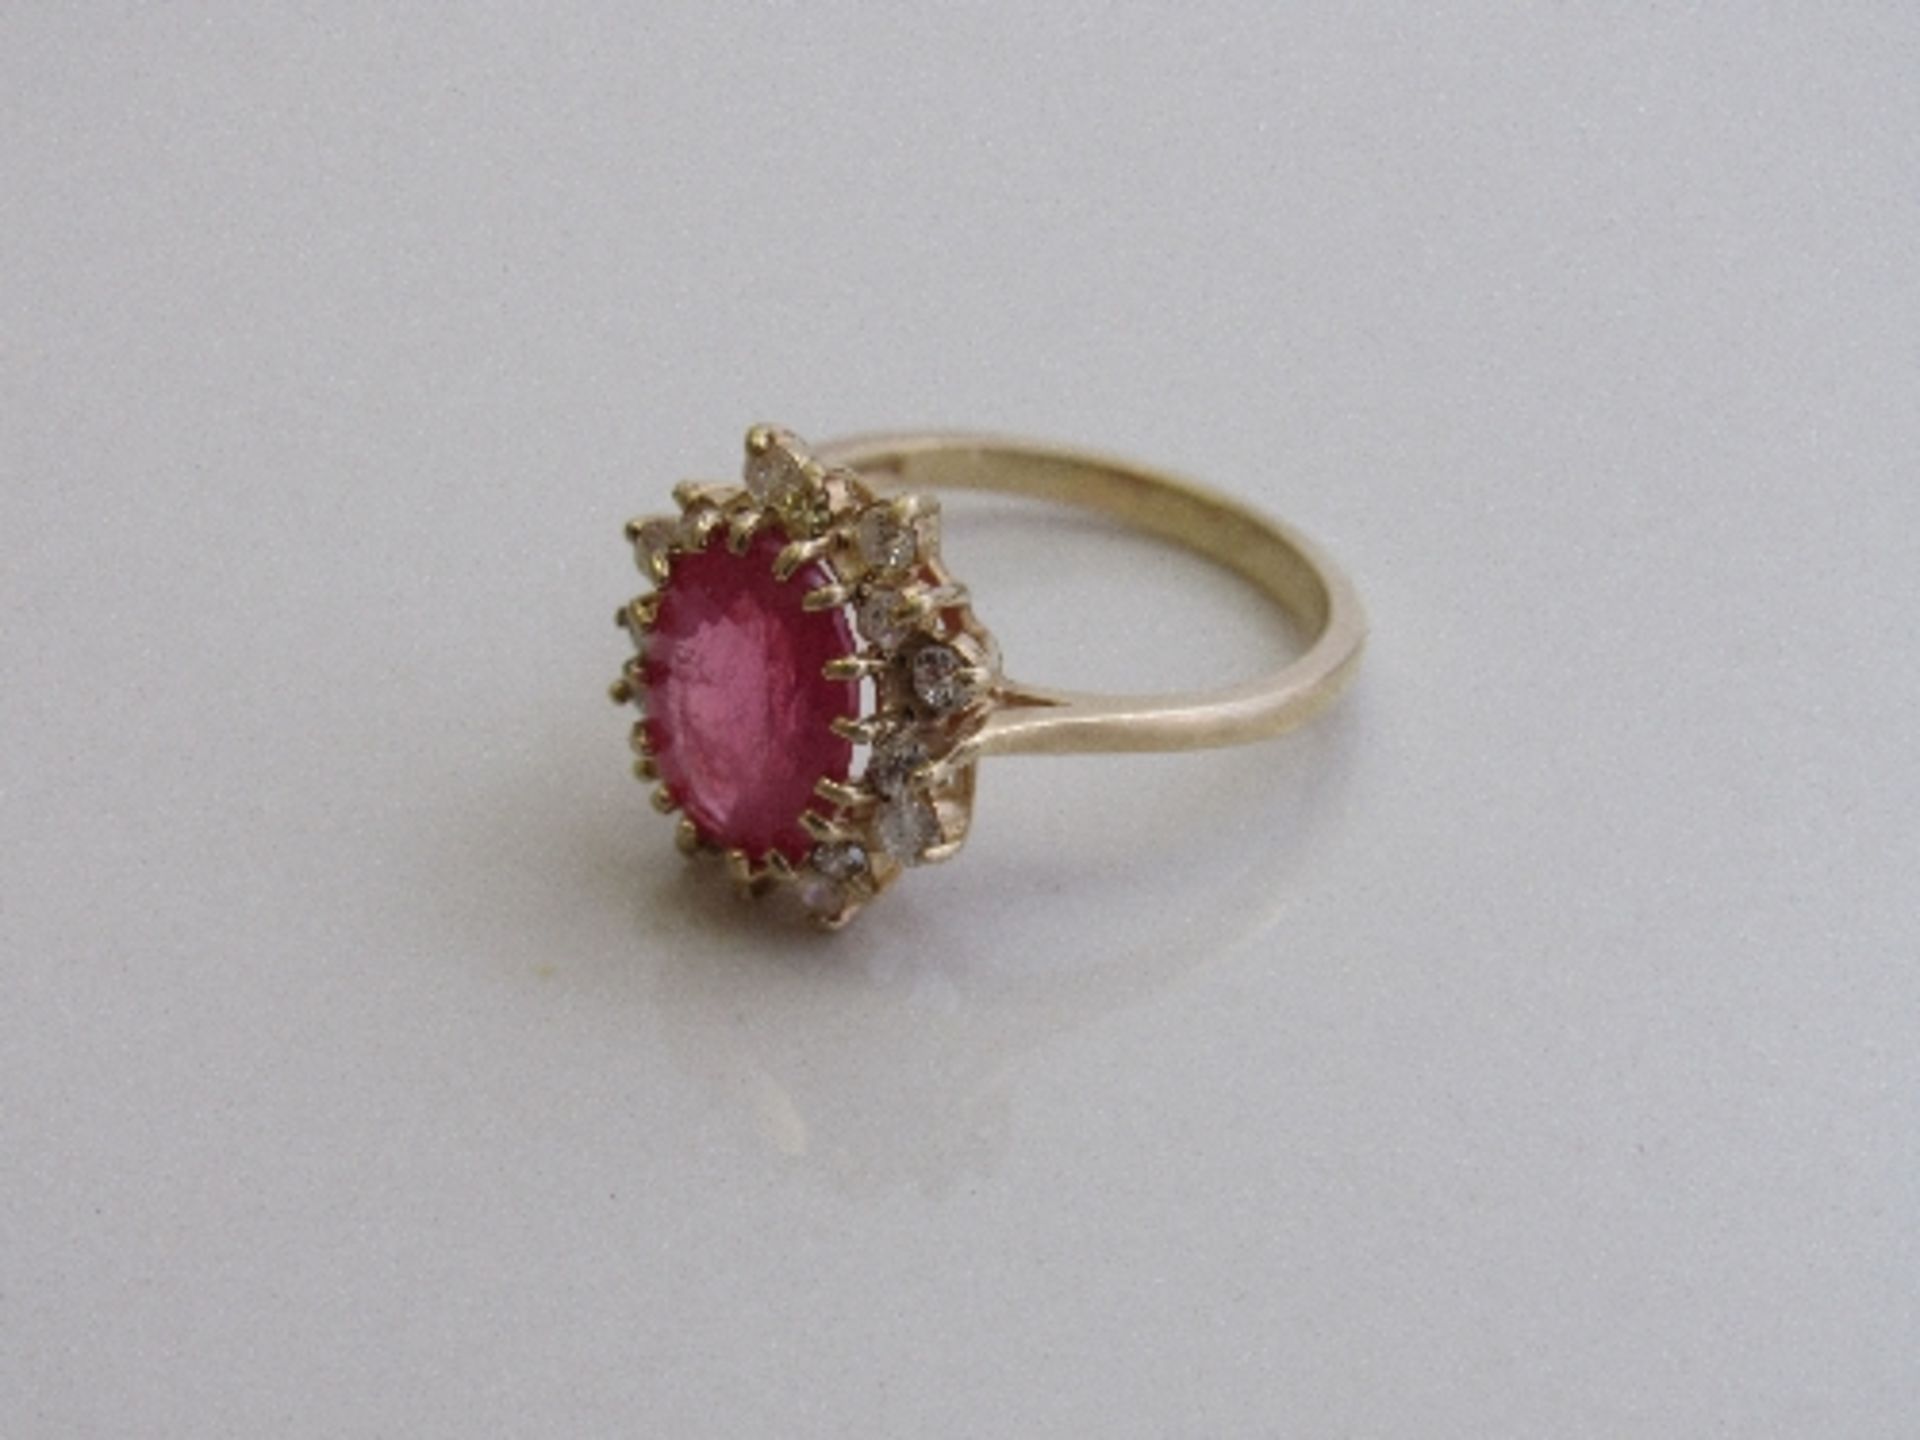 9ct gold, ruby & diamond ring, size Q, weight 3.6gms. Estimate £250-300 - Image 2 of 2